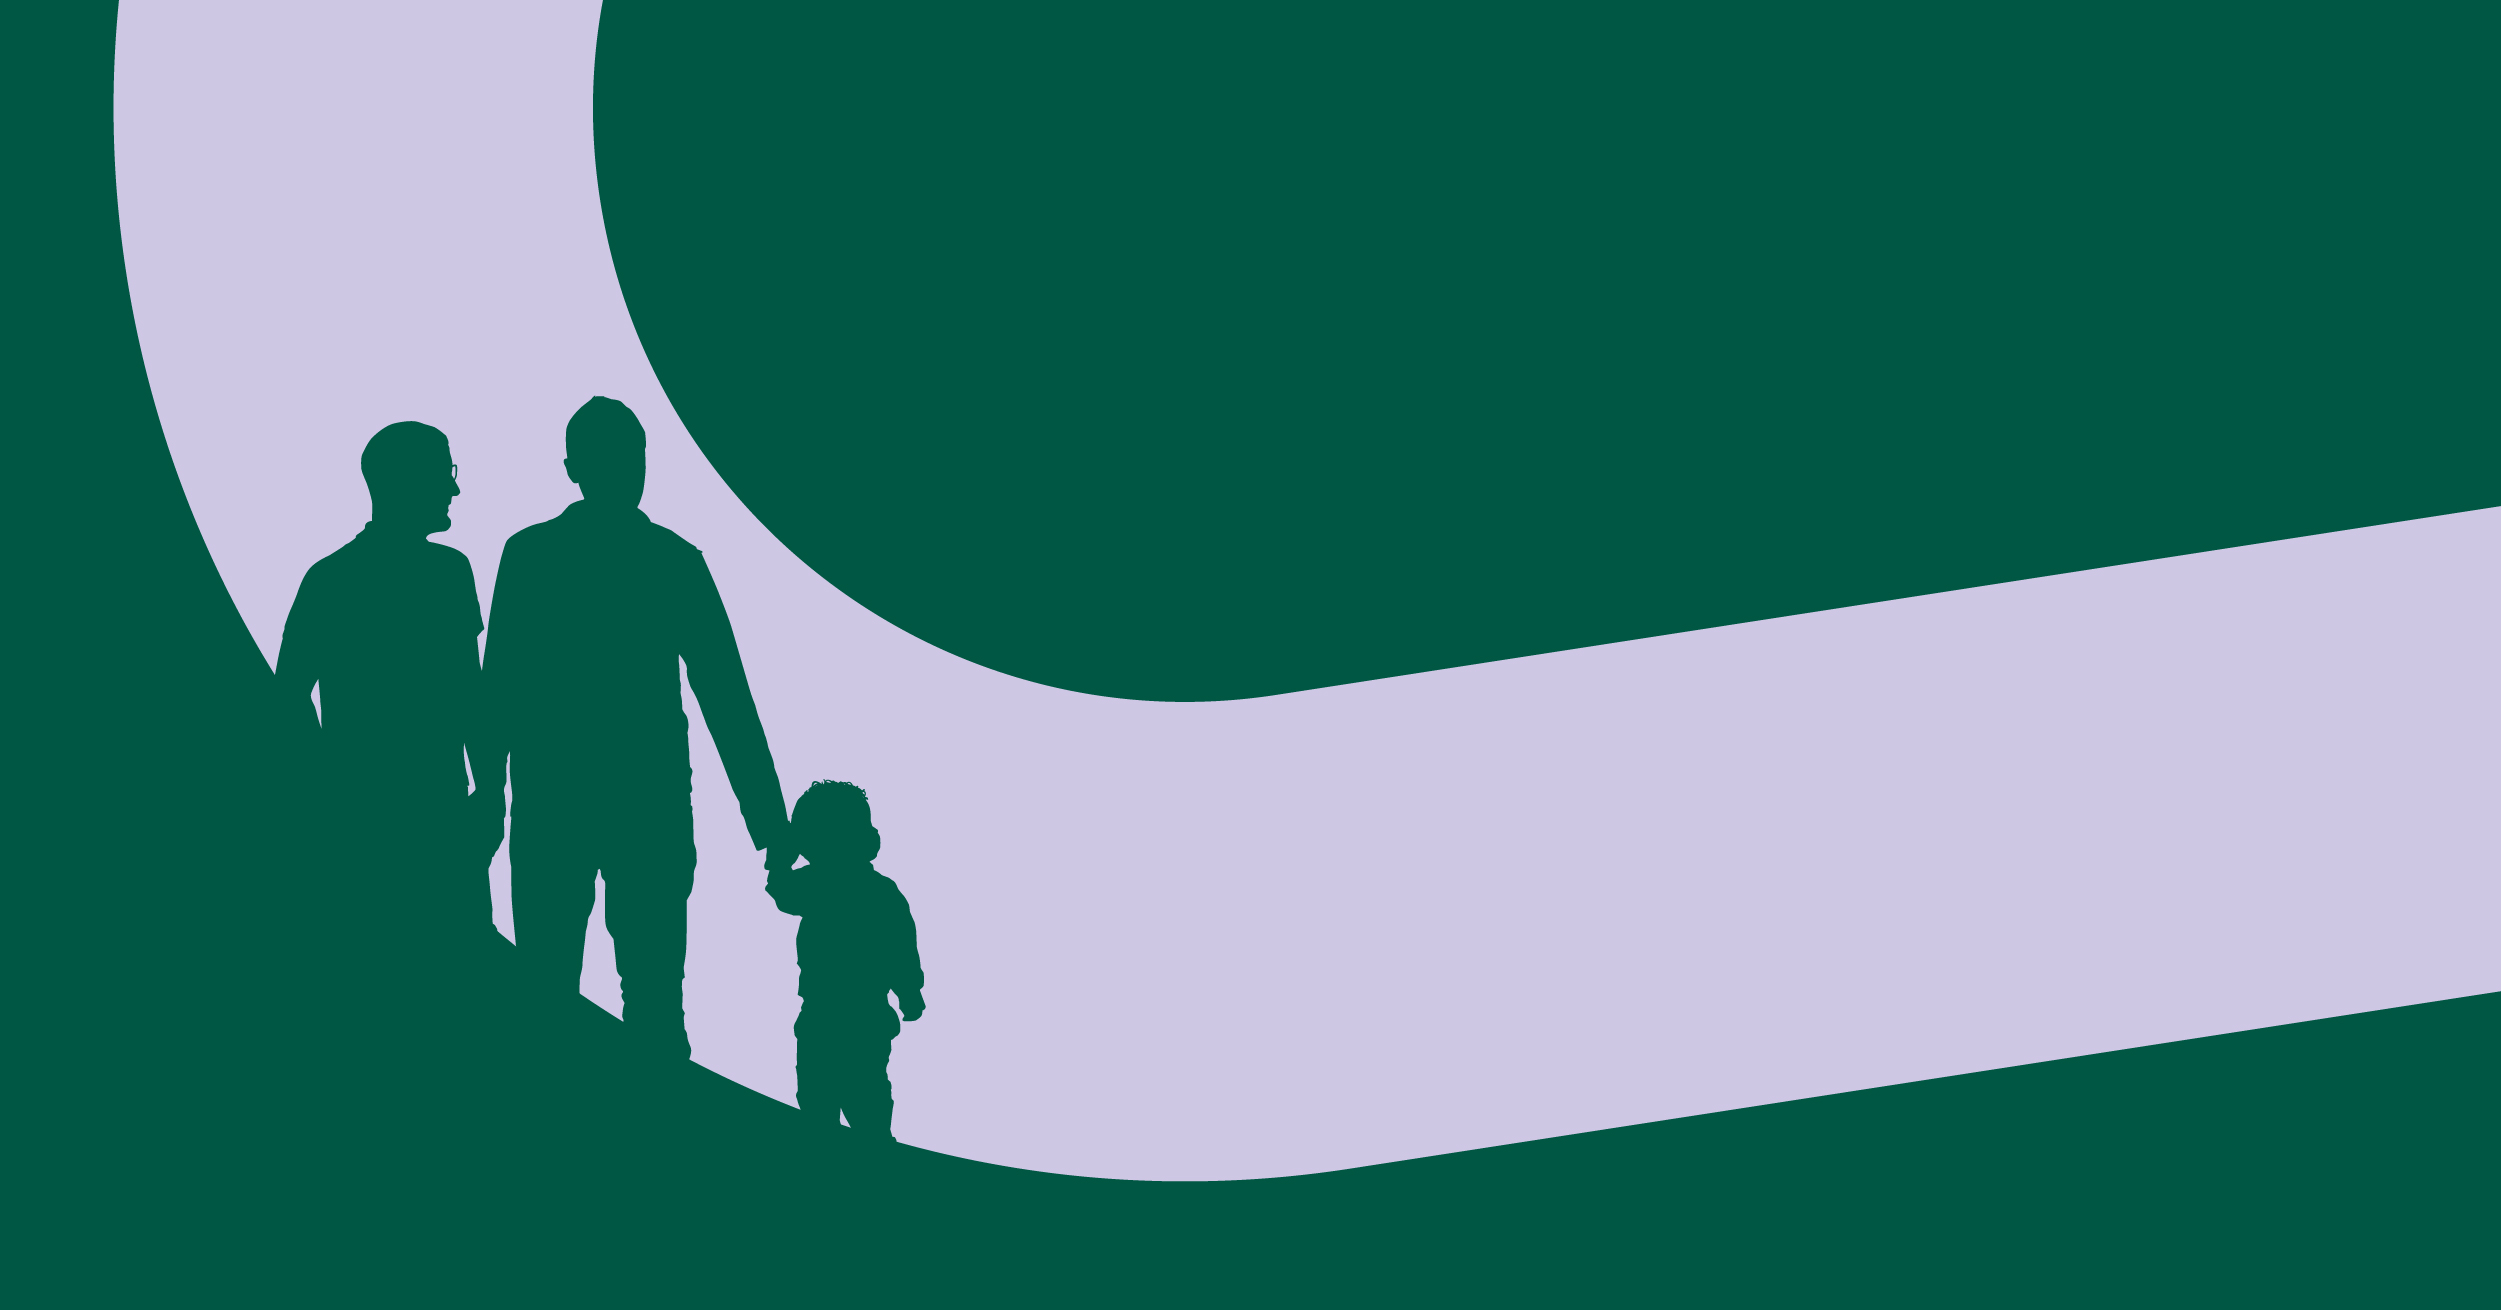 Silhouettes of two adults and a child